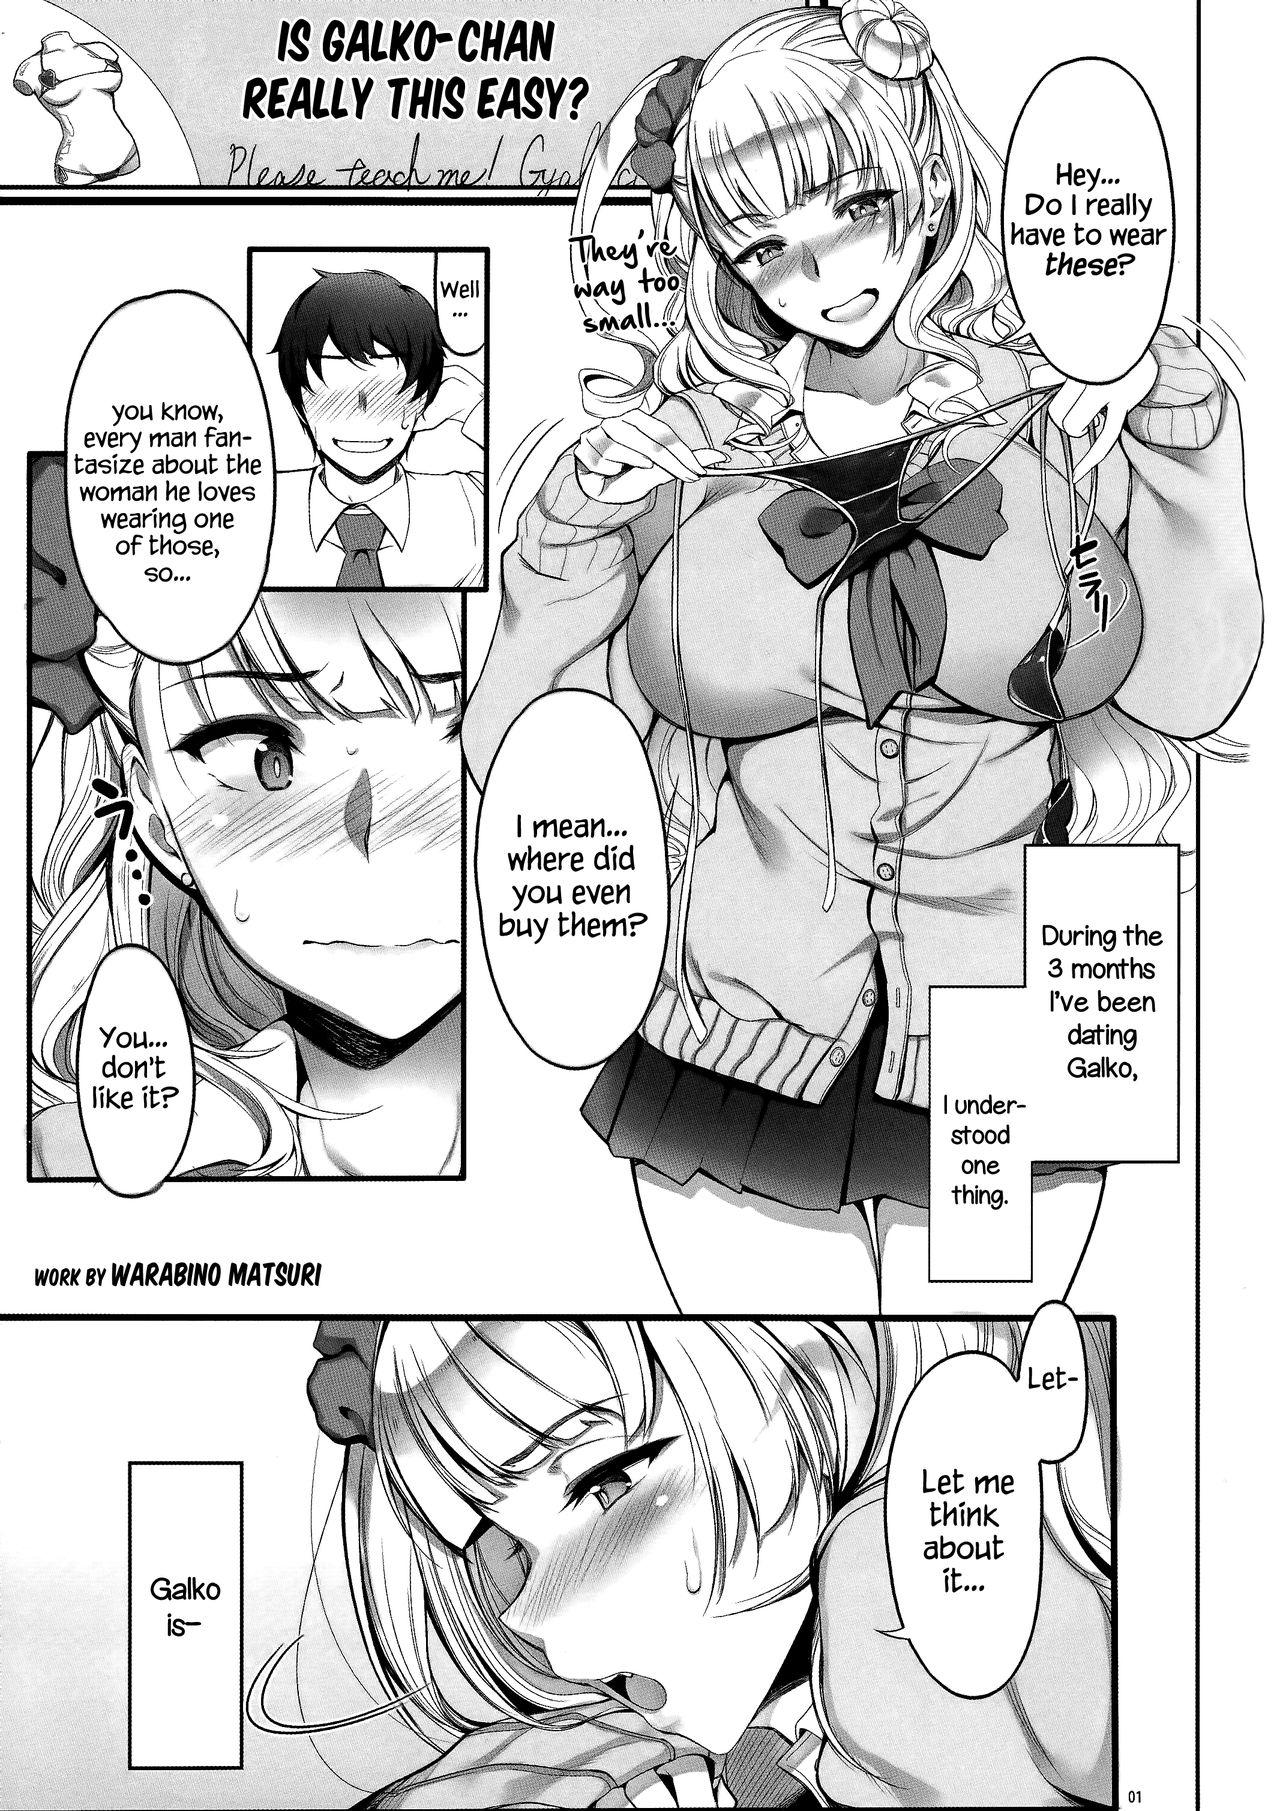 Foursome Angel's Stroke 87b Galko-chan 0.02!! - Oshiete galko-chan Ano - Page 3